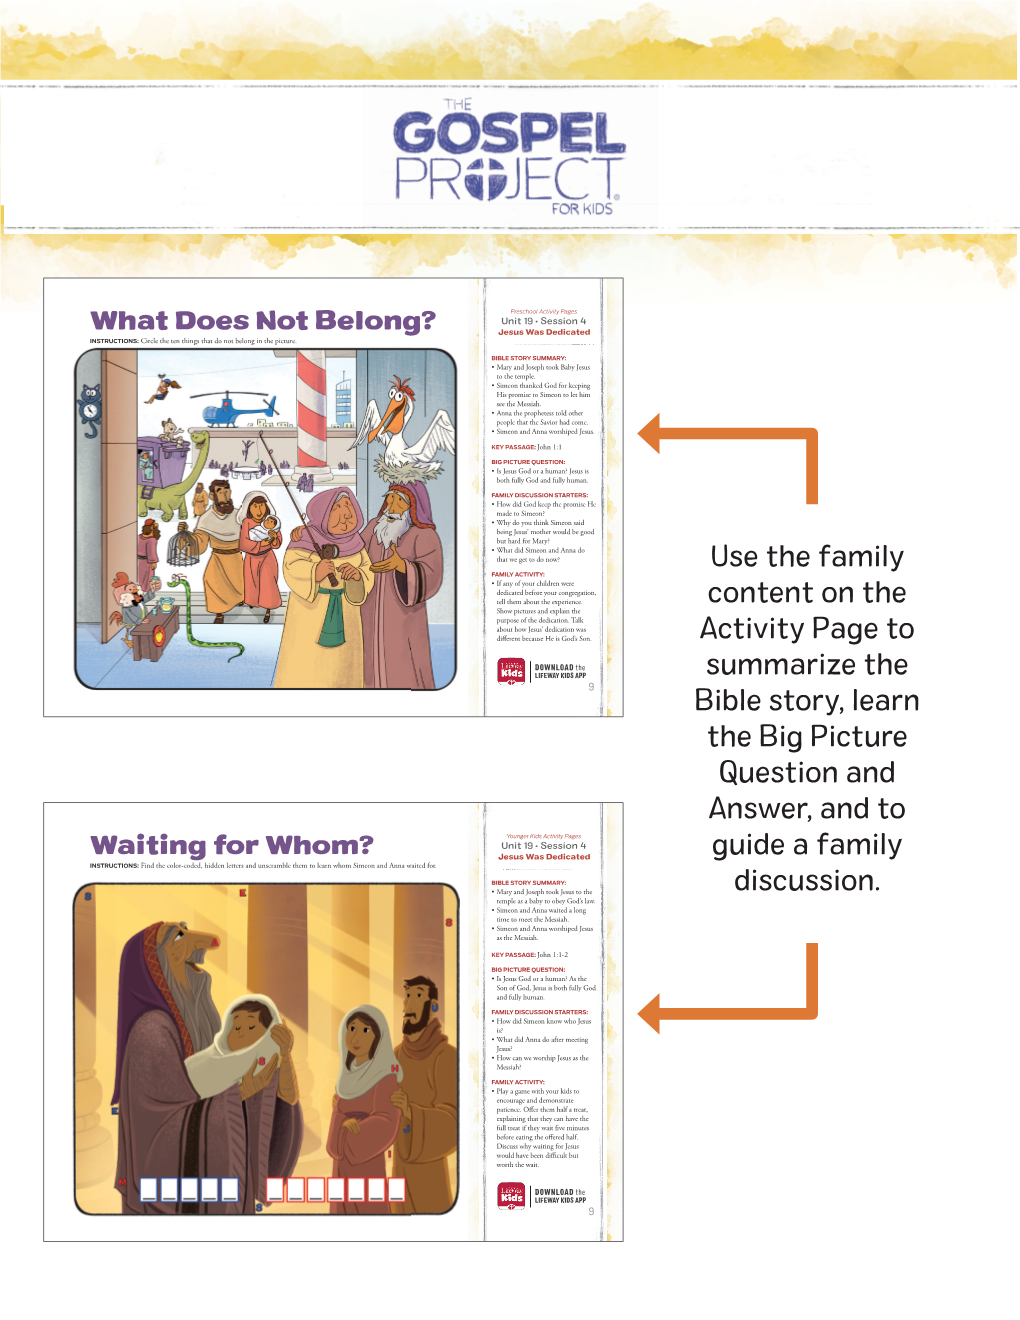 Use the Family Content on the Activity Page to Summarize the Bible Story, Learn the Big Picture Question and Answer, and to Guid